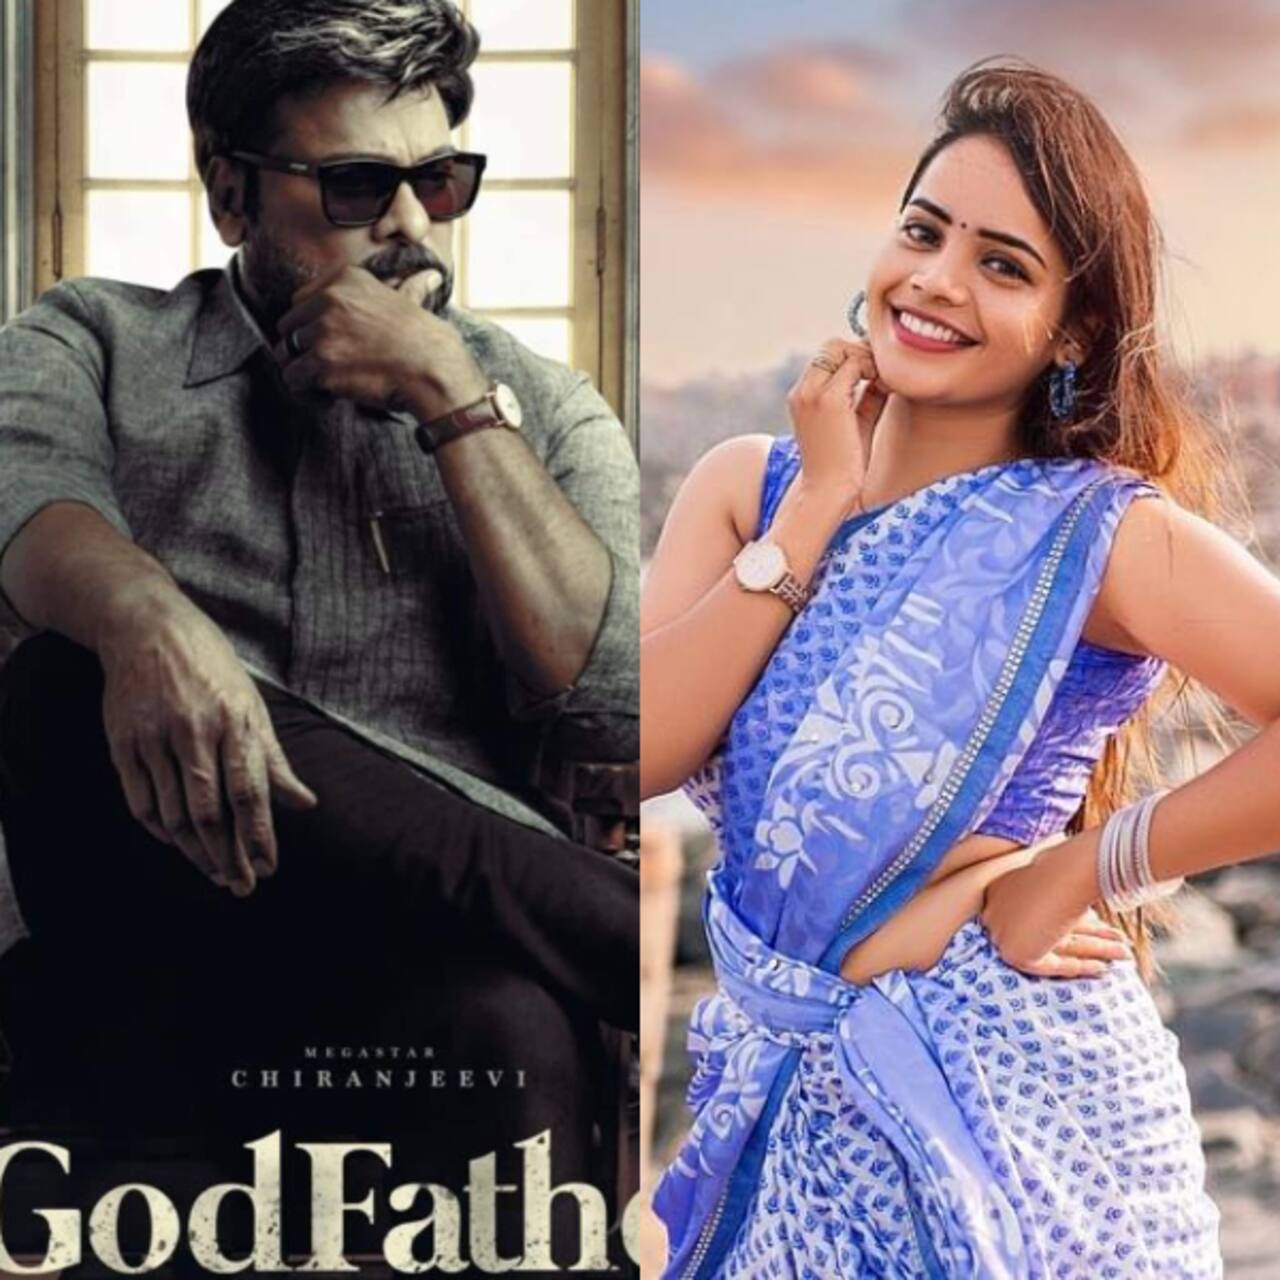 Trending South News Today: Chiranjeevi's GodFather finding no distributors, Tamil actress Deepa commits suicide and more